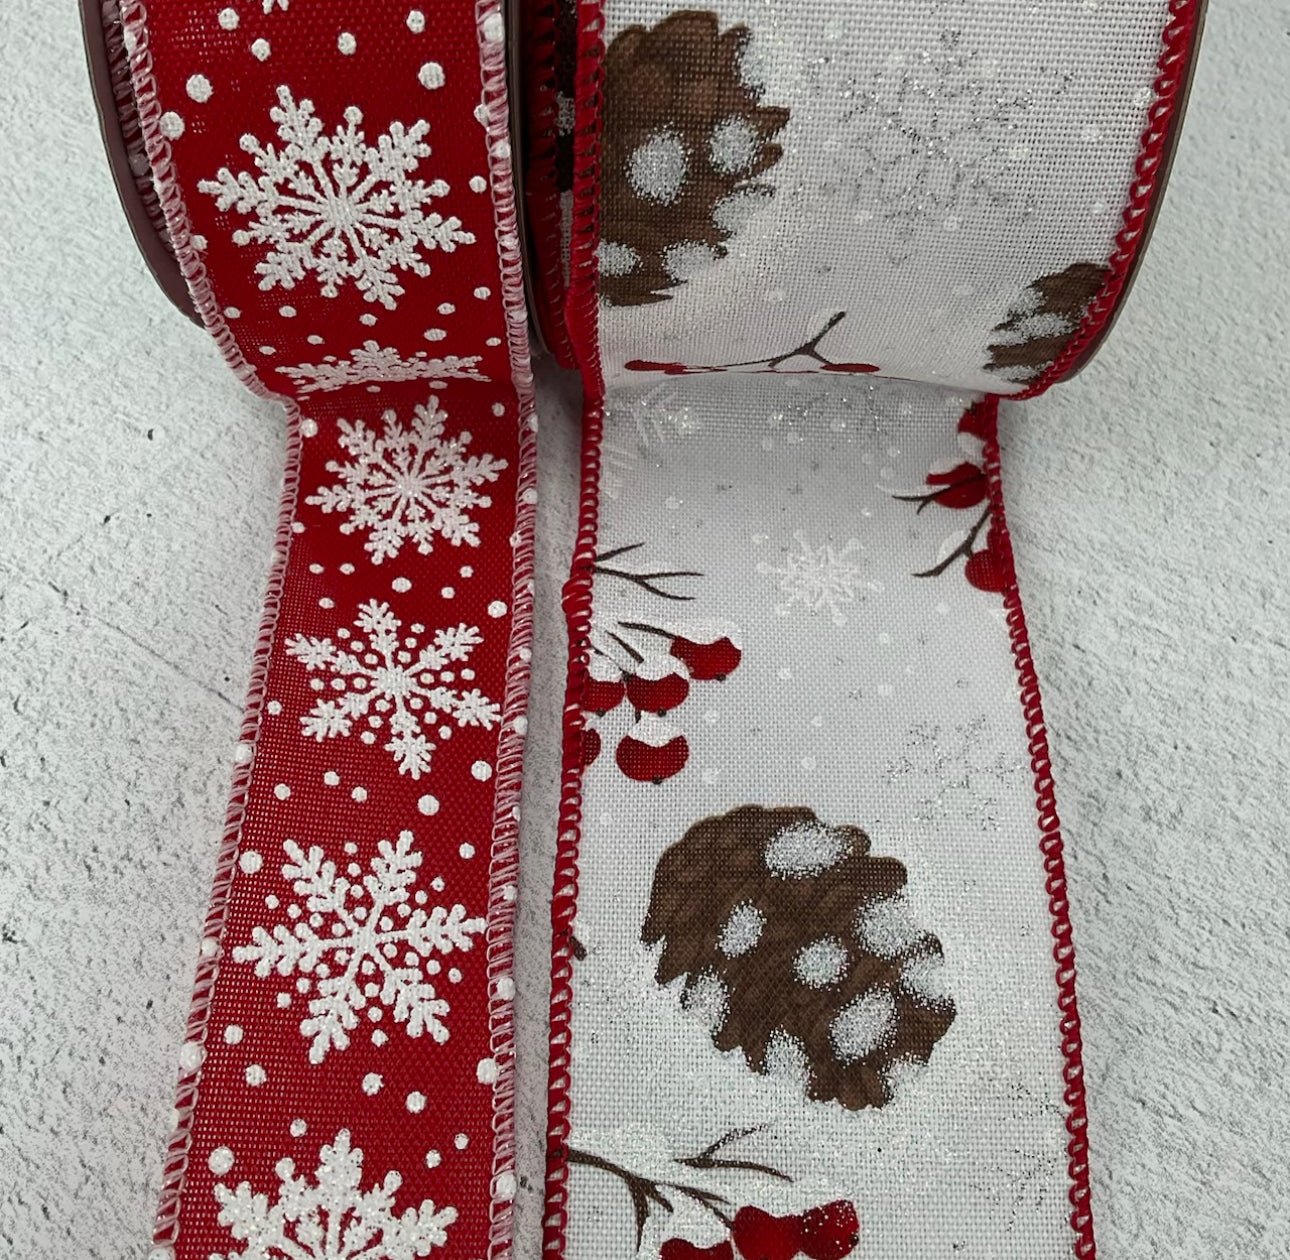 Berries, snowflakes, and pinecone Christmas bow bundle x 2 ribbons - Greenery MarketRibbons & TrimPineconeflakesx2